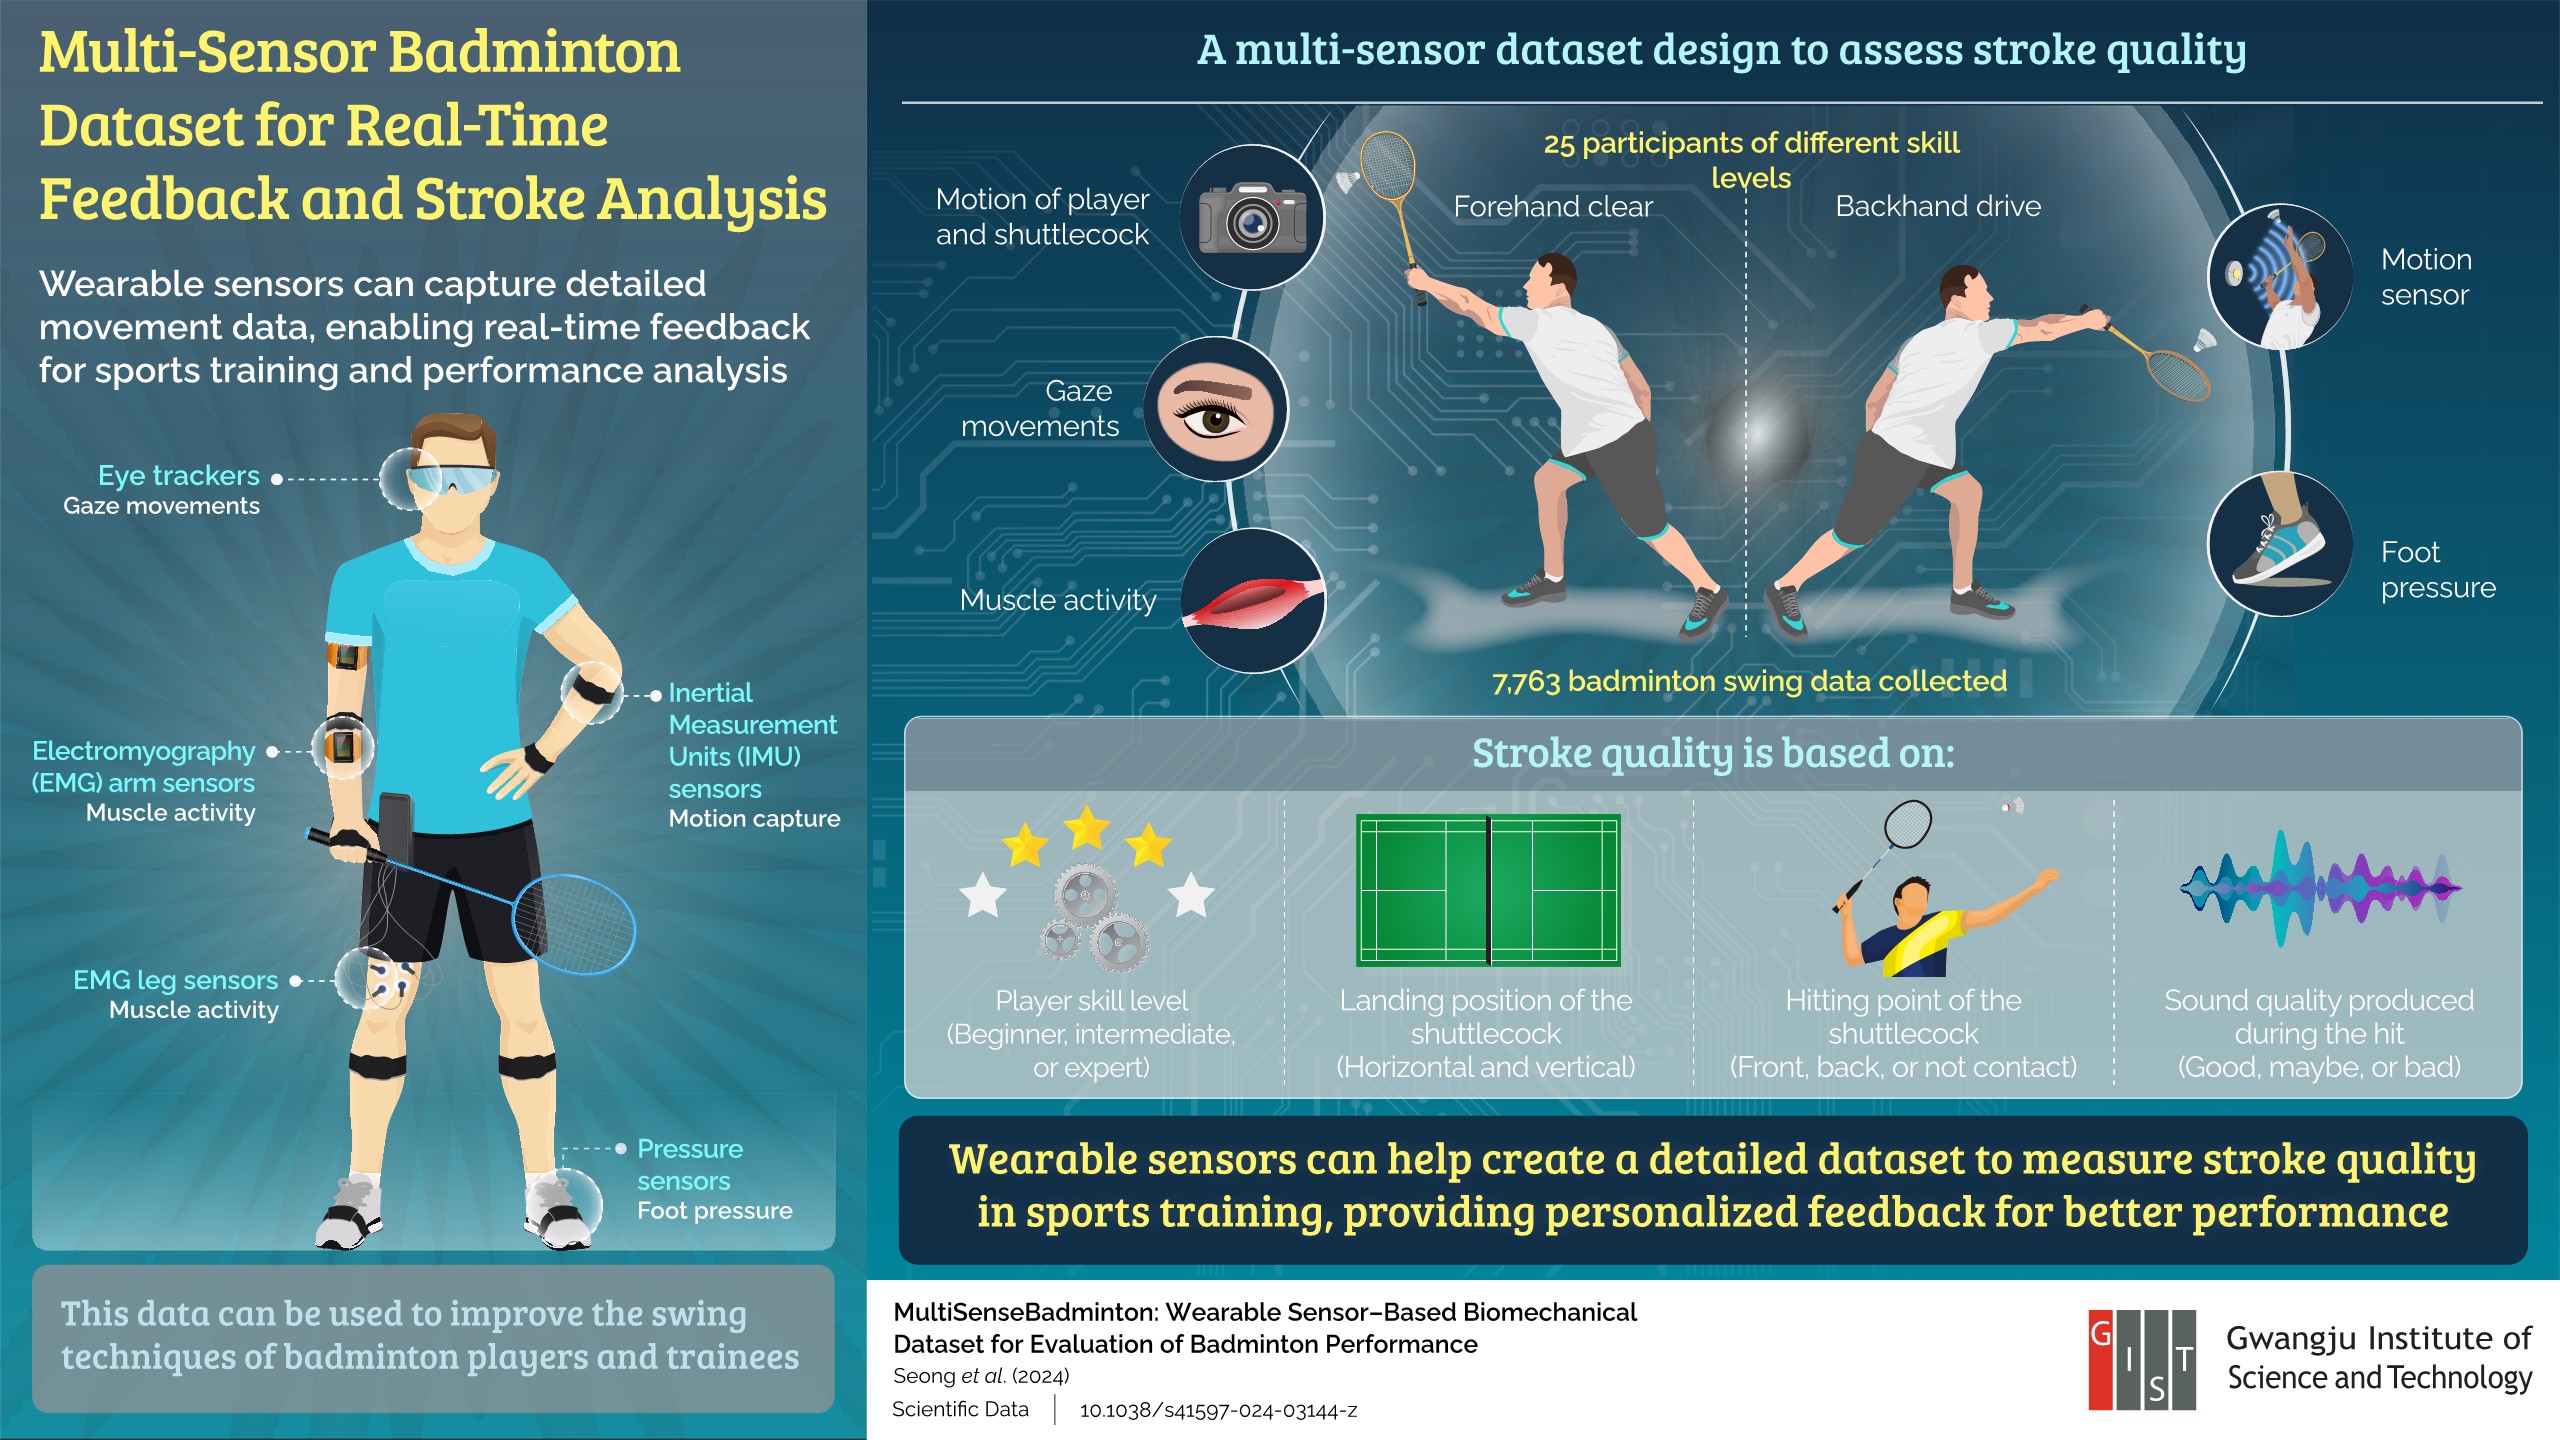 GIST-MIT CSAIL Researchers Develop A Biomechanical Dataset for Badminton Performance Analysis 이미지